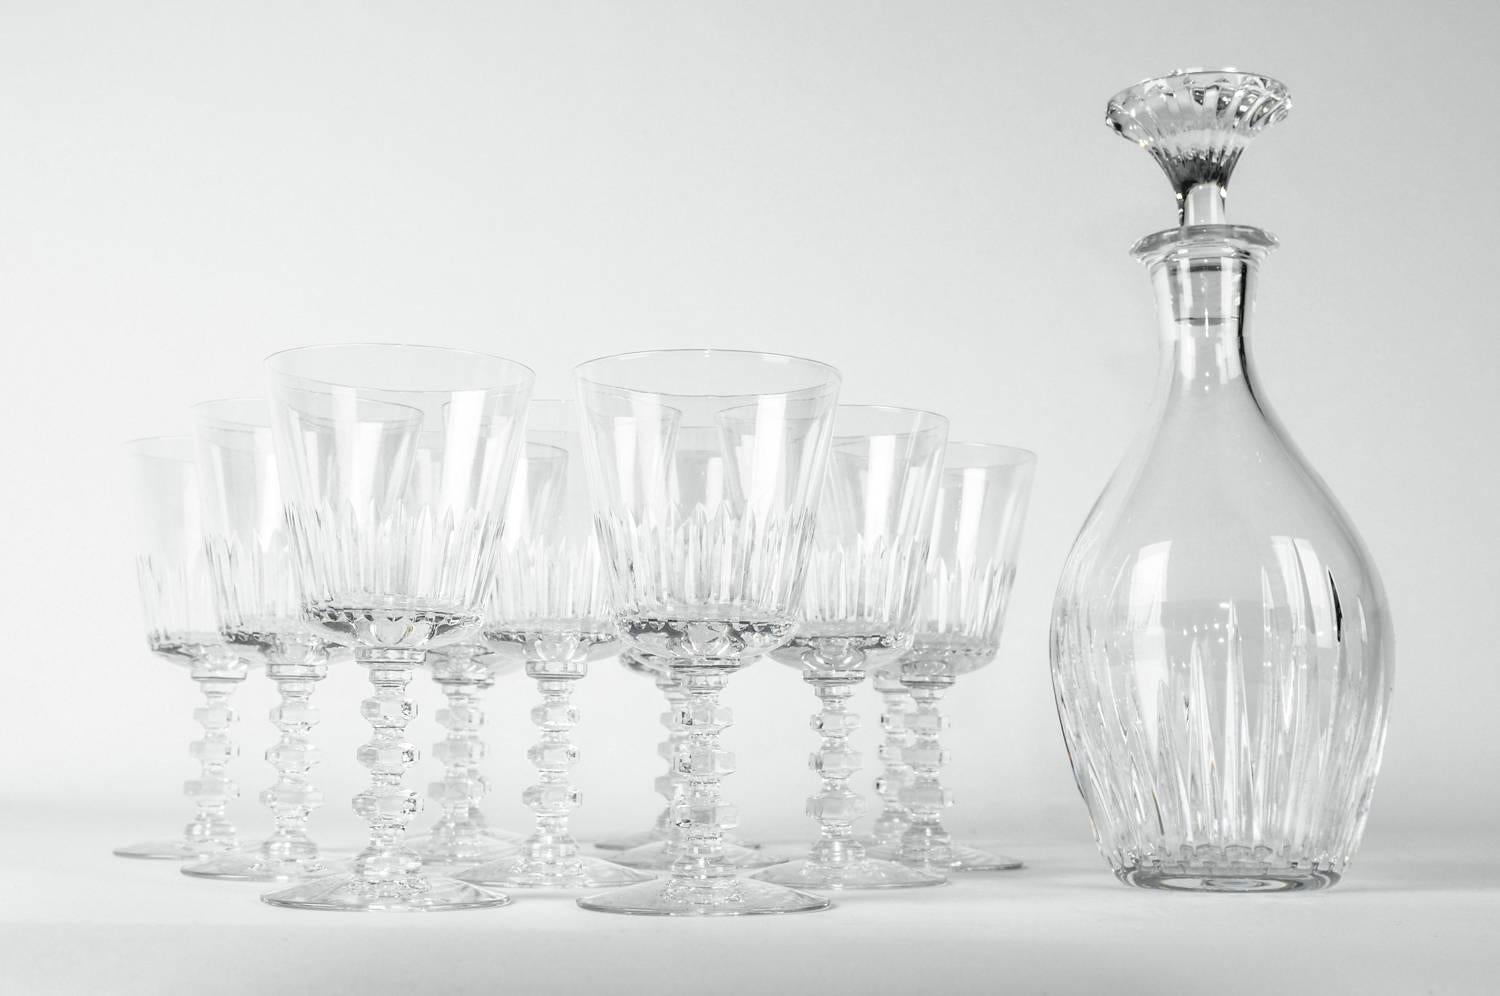 Vintage France acid etched Baccarat decanter set with 12 glassware. Each piece is in excellent condition, maker's mark undersigned. The Baccarat decanter measure about 11 inches high x 4.5 inches diameter. Each glass measure 6.2 inches high x 3.5